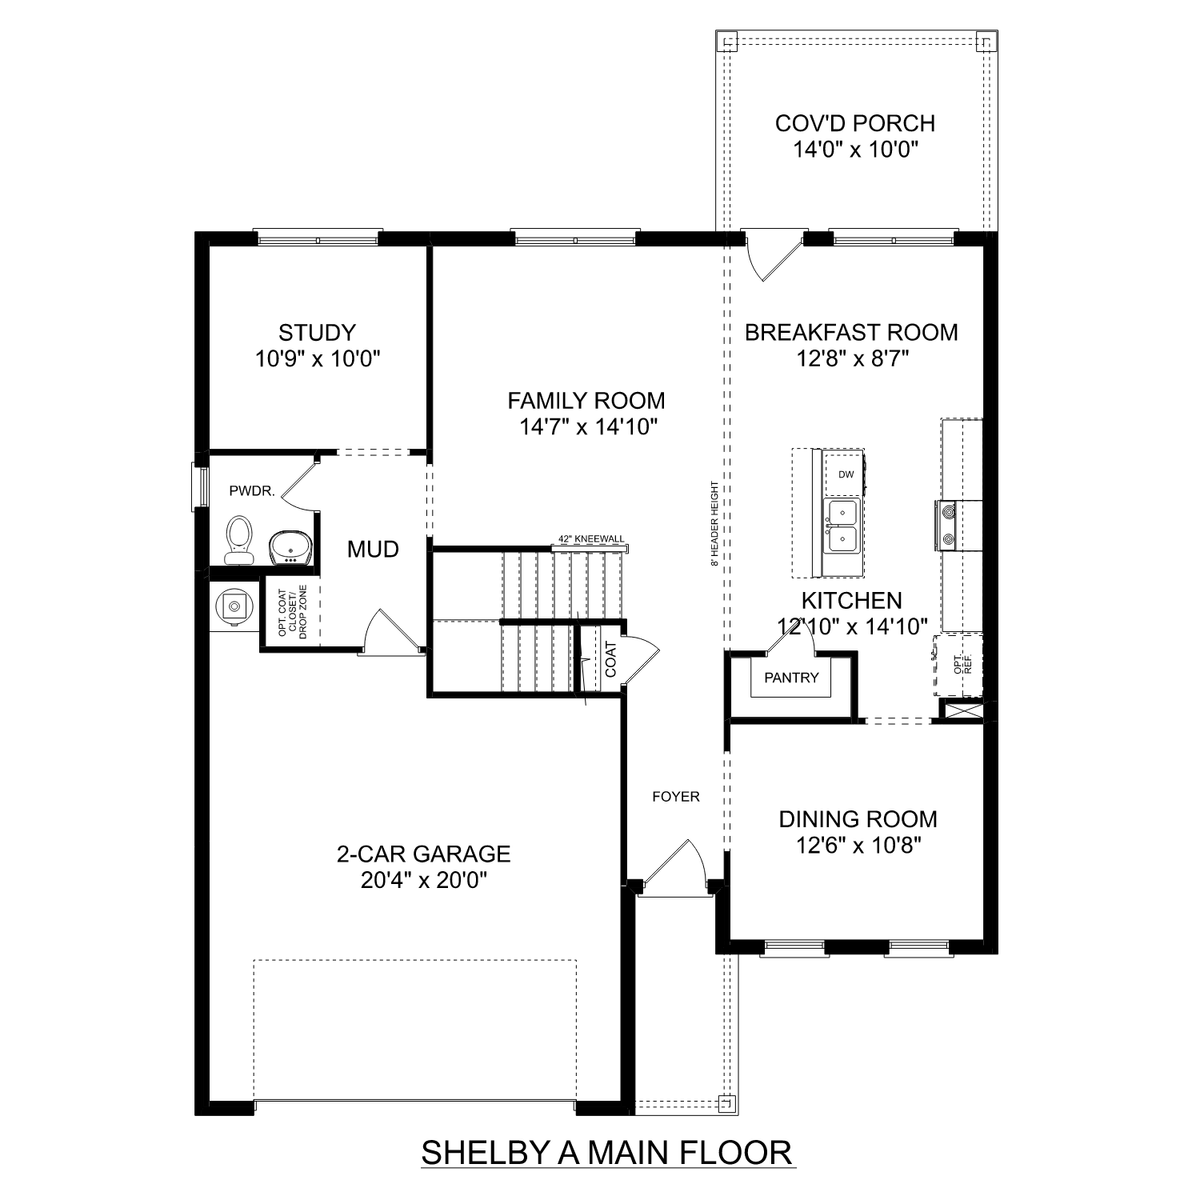 1 - The Shelby A buildable floor plan layout in Davidson Homes' Wood Trail community.